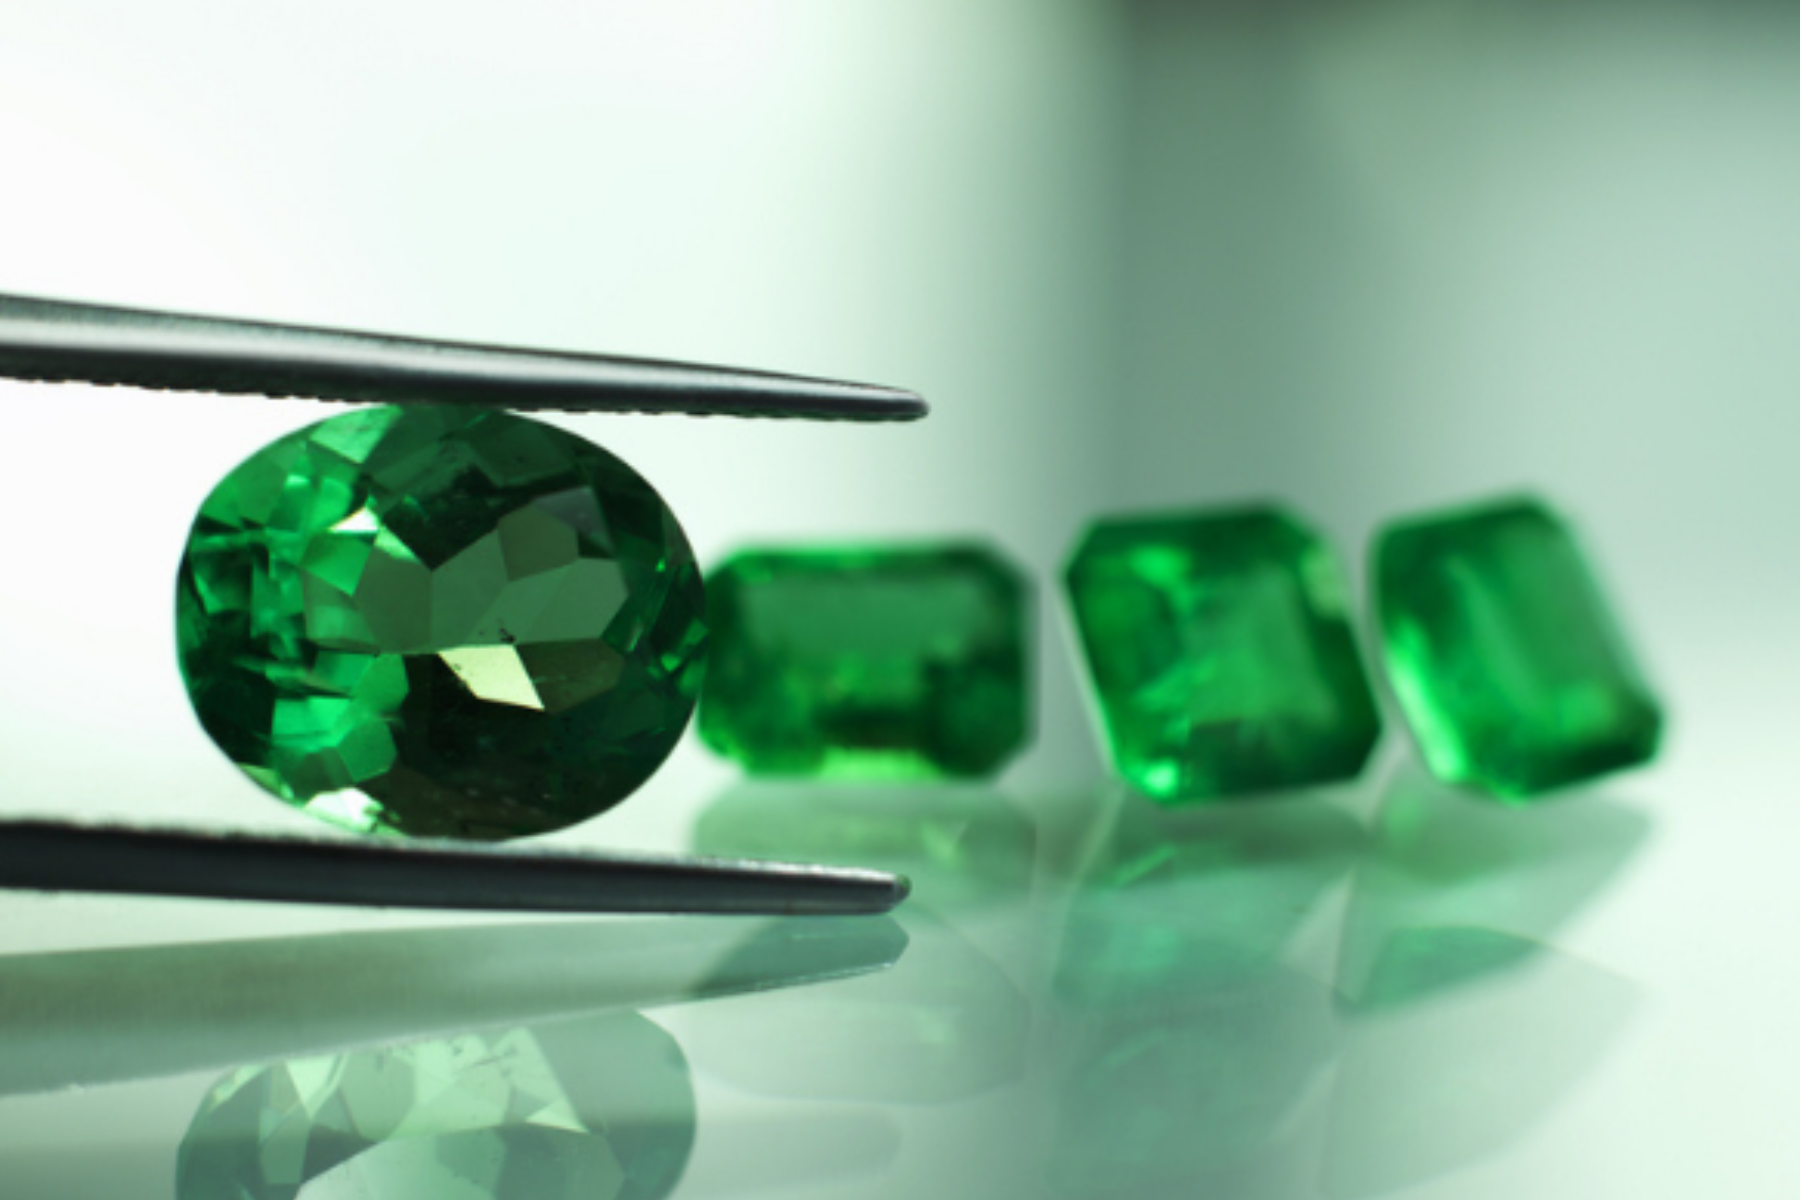 A prong selects one emerald